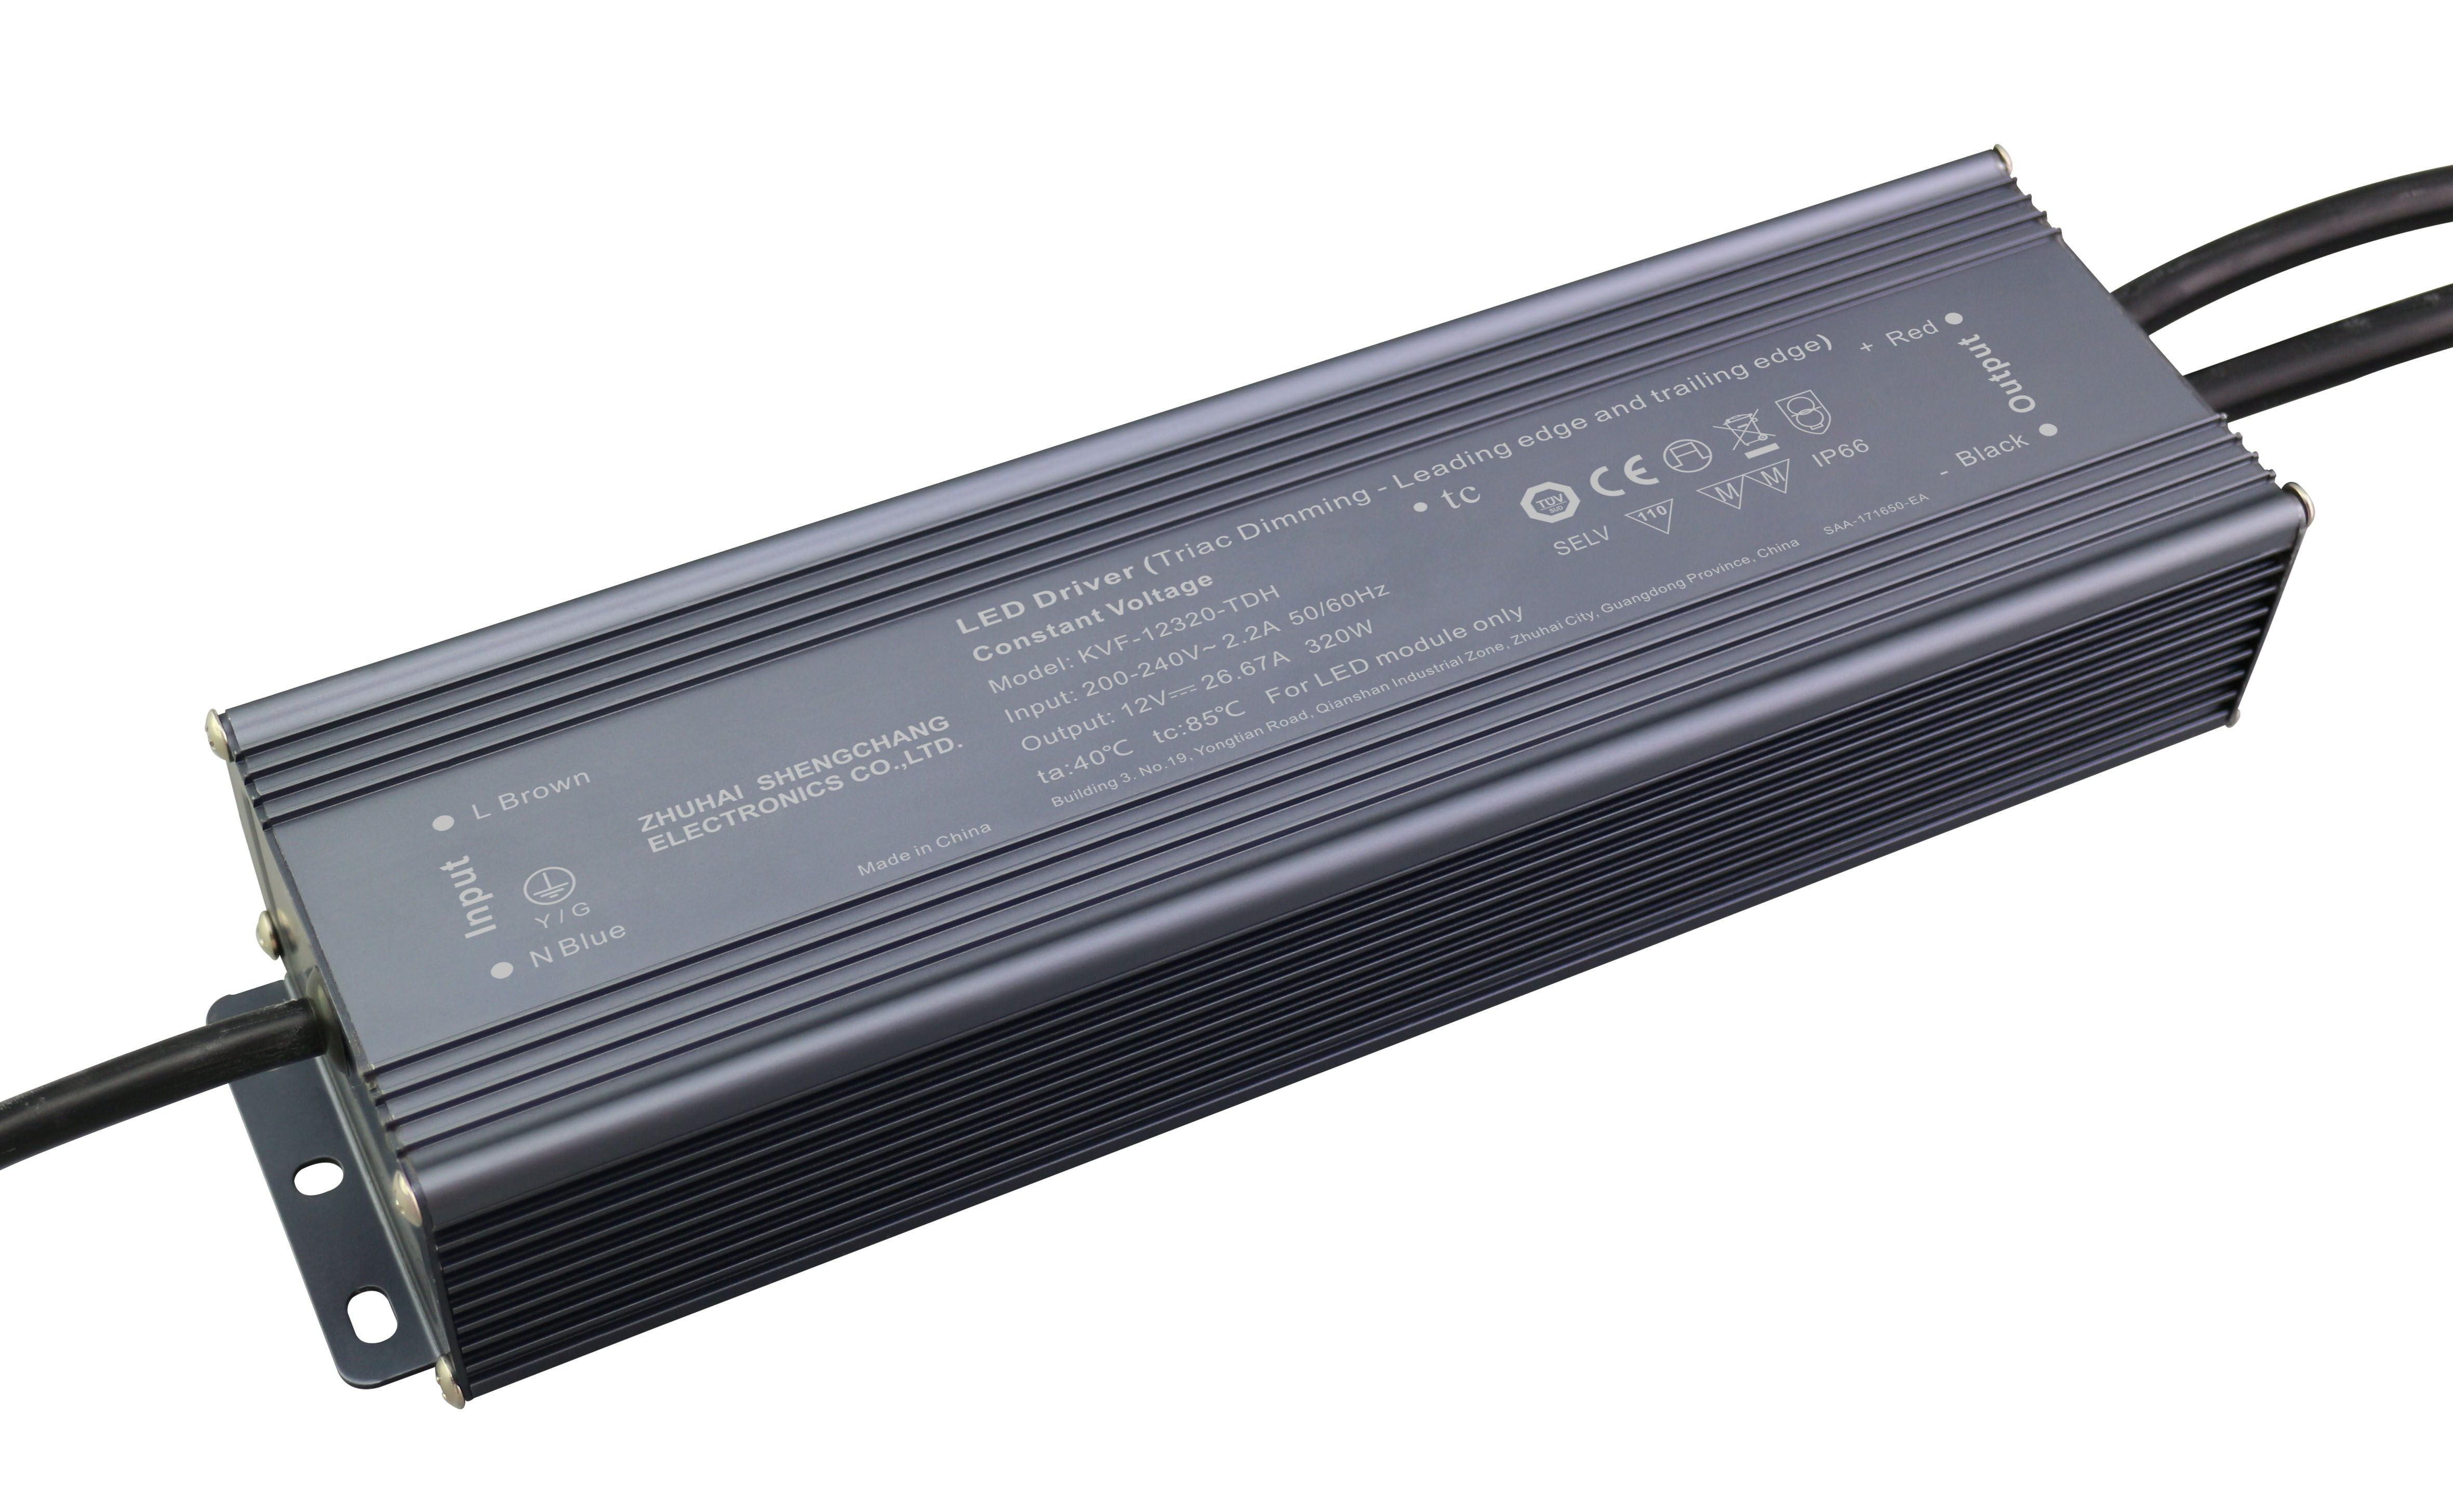 KVF-TDH series 320W Constant Voltage Triac Dimmable LED Driver